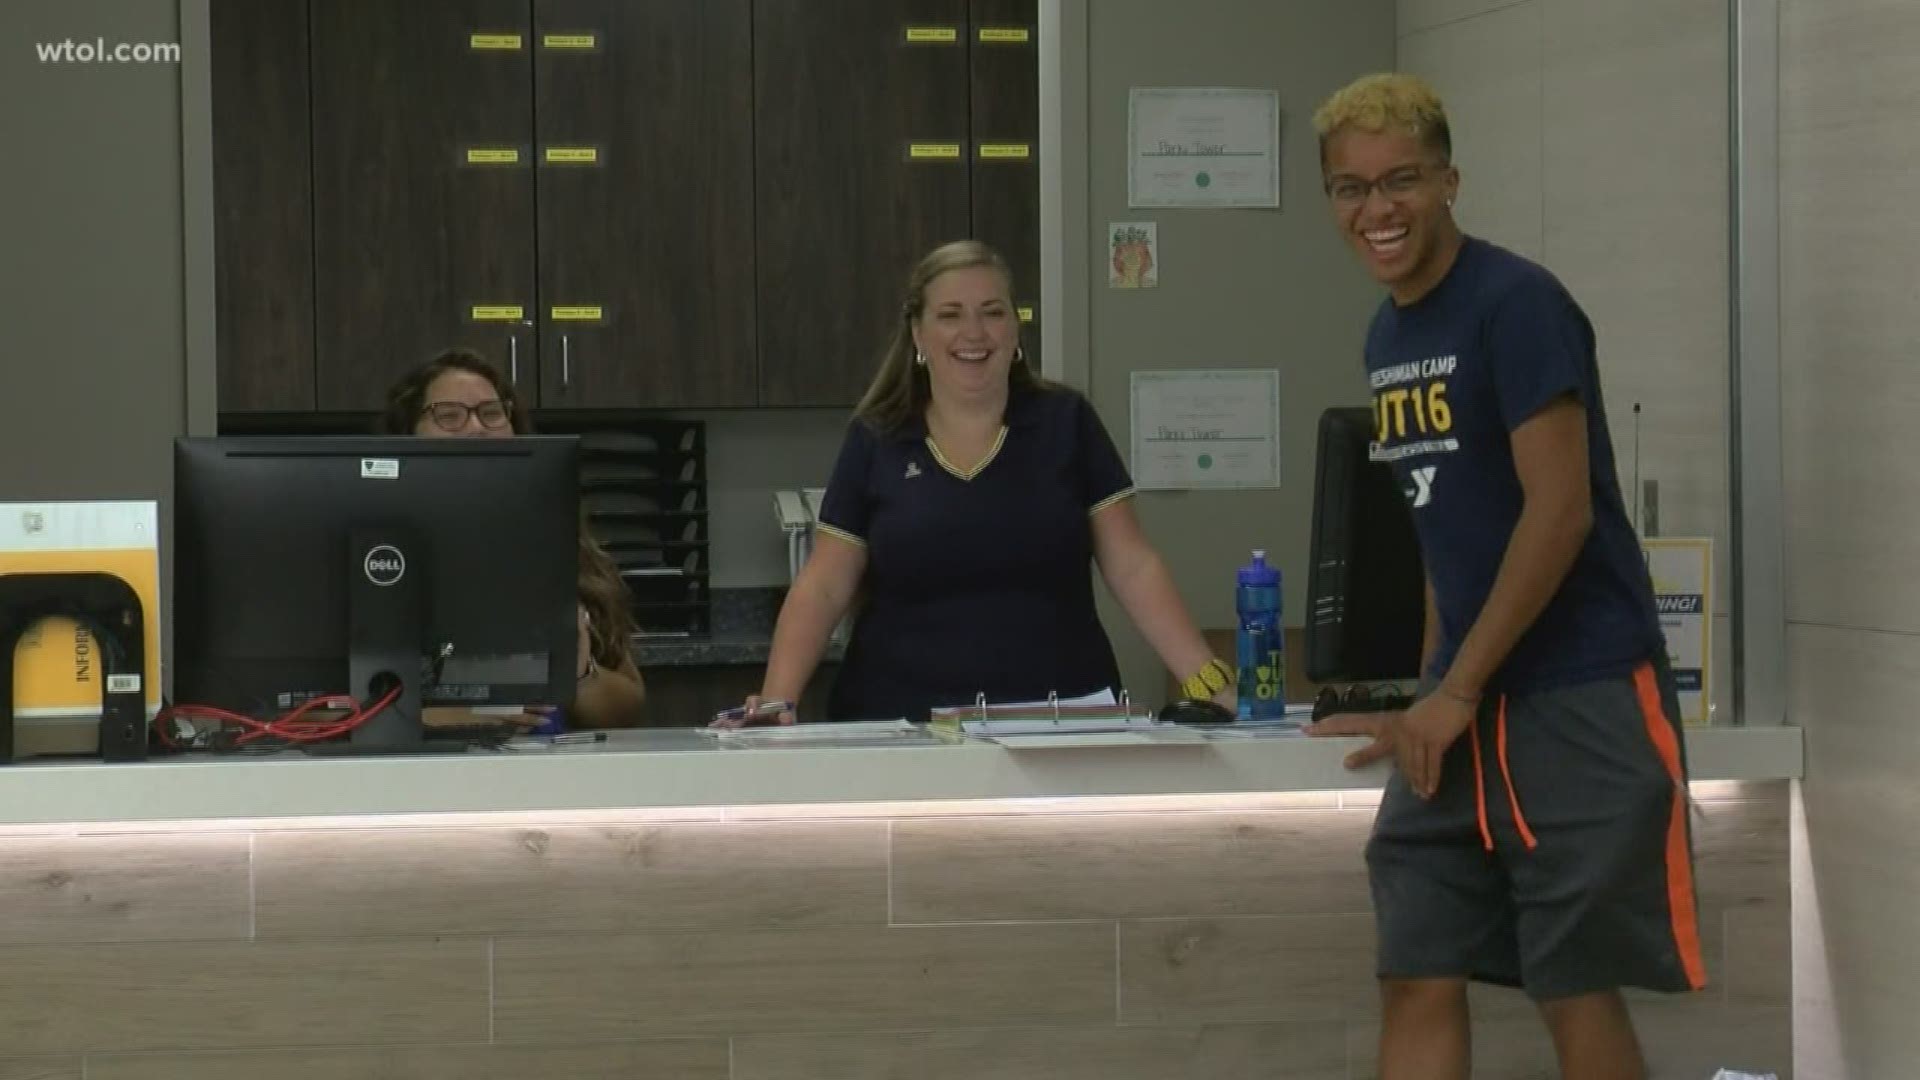 The University of Toledo students and their parents had a busy day Friday preparing for the start of fall semester